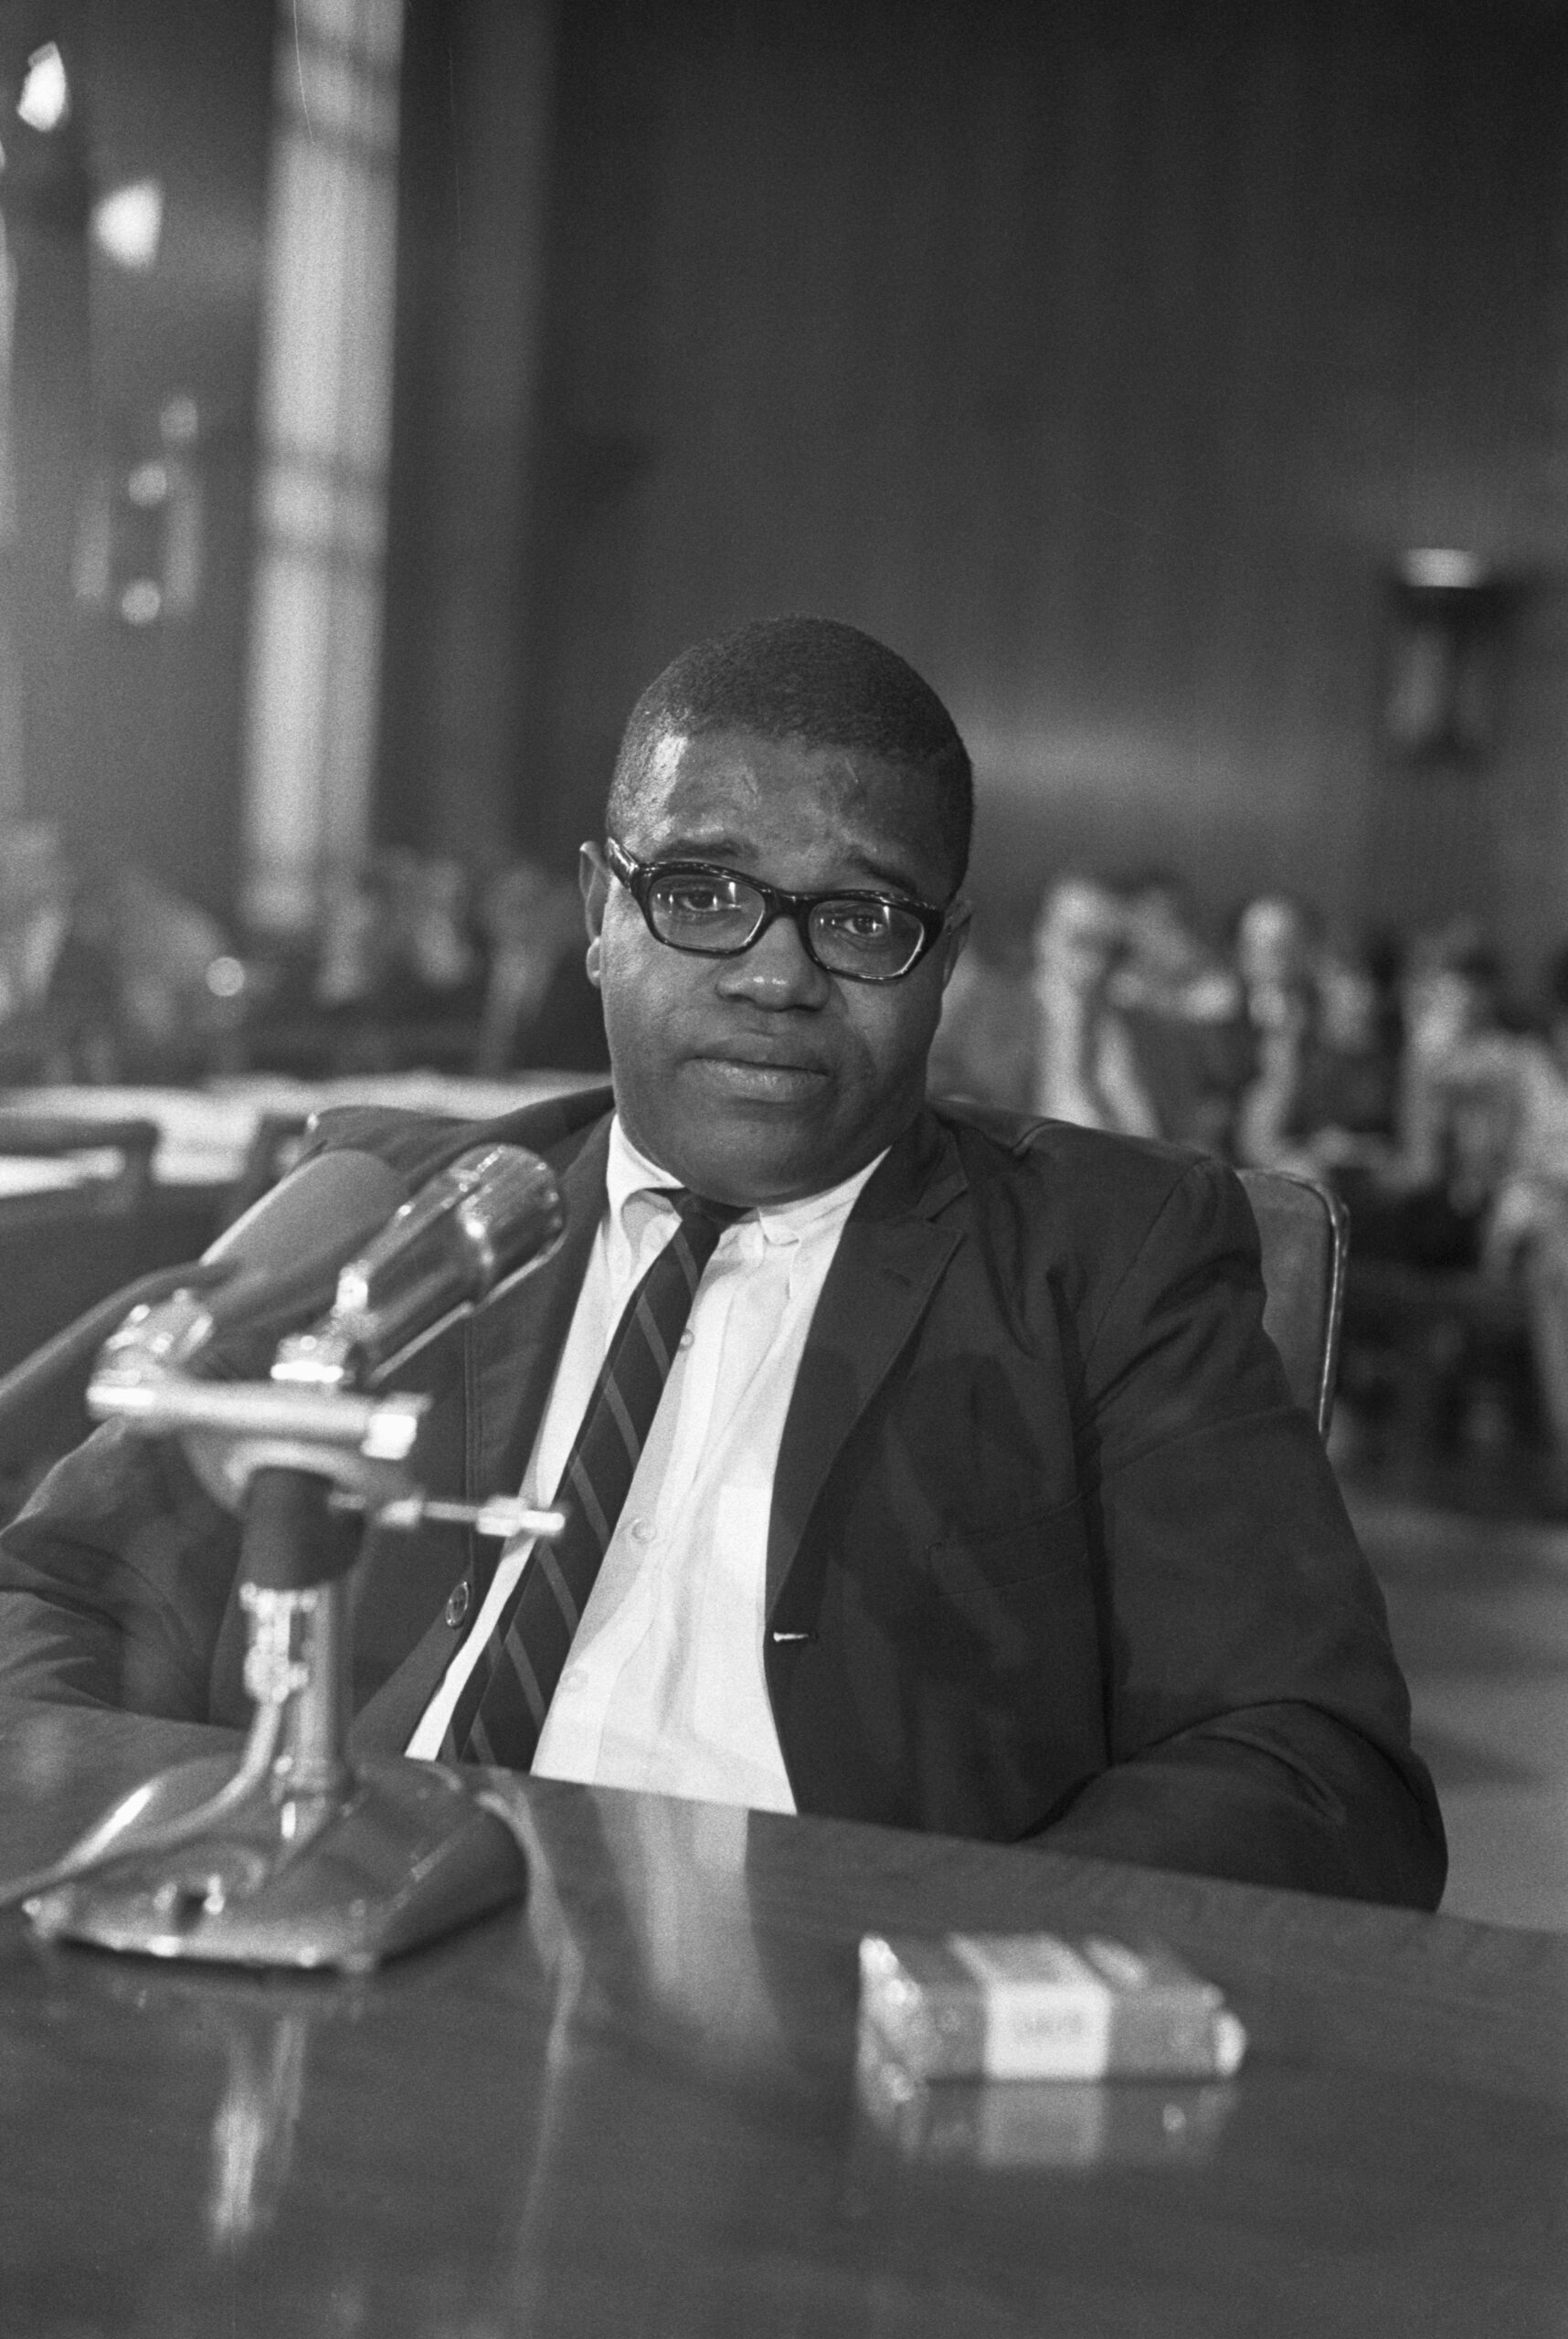 Claude Brown, author of Manchild in the Promised Land, testifies before the Senate subcommittee on Executive Reorganization on the conditions of black American ghettos.